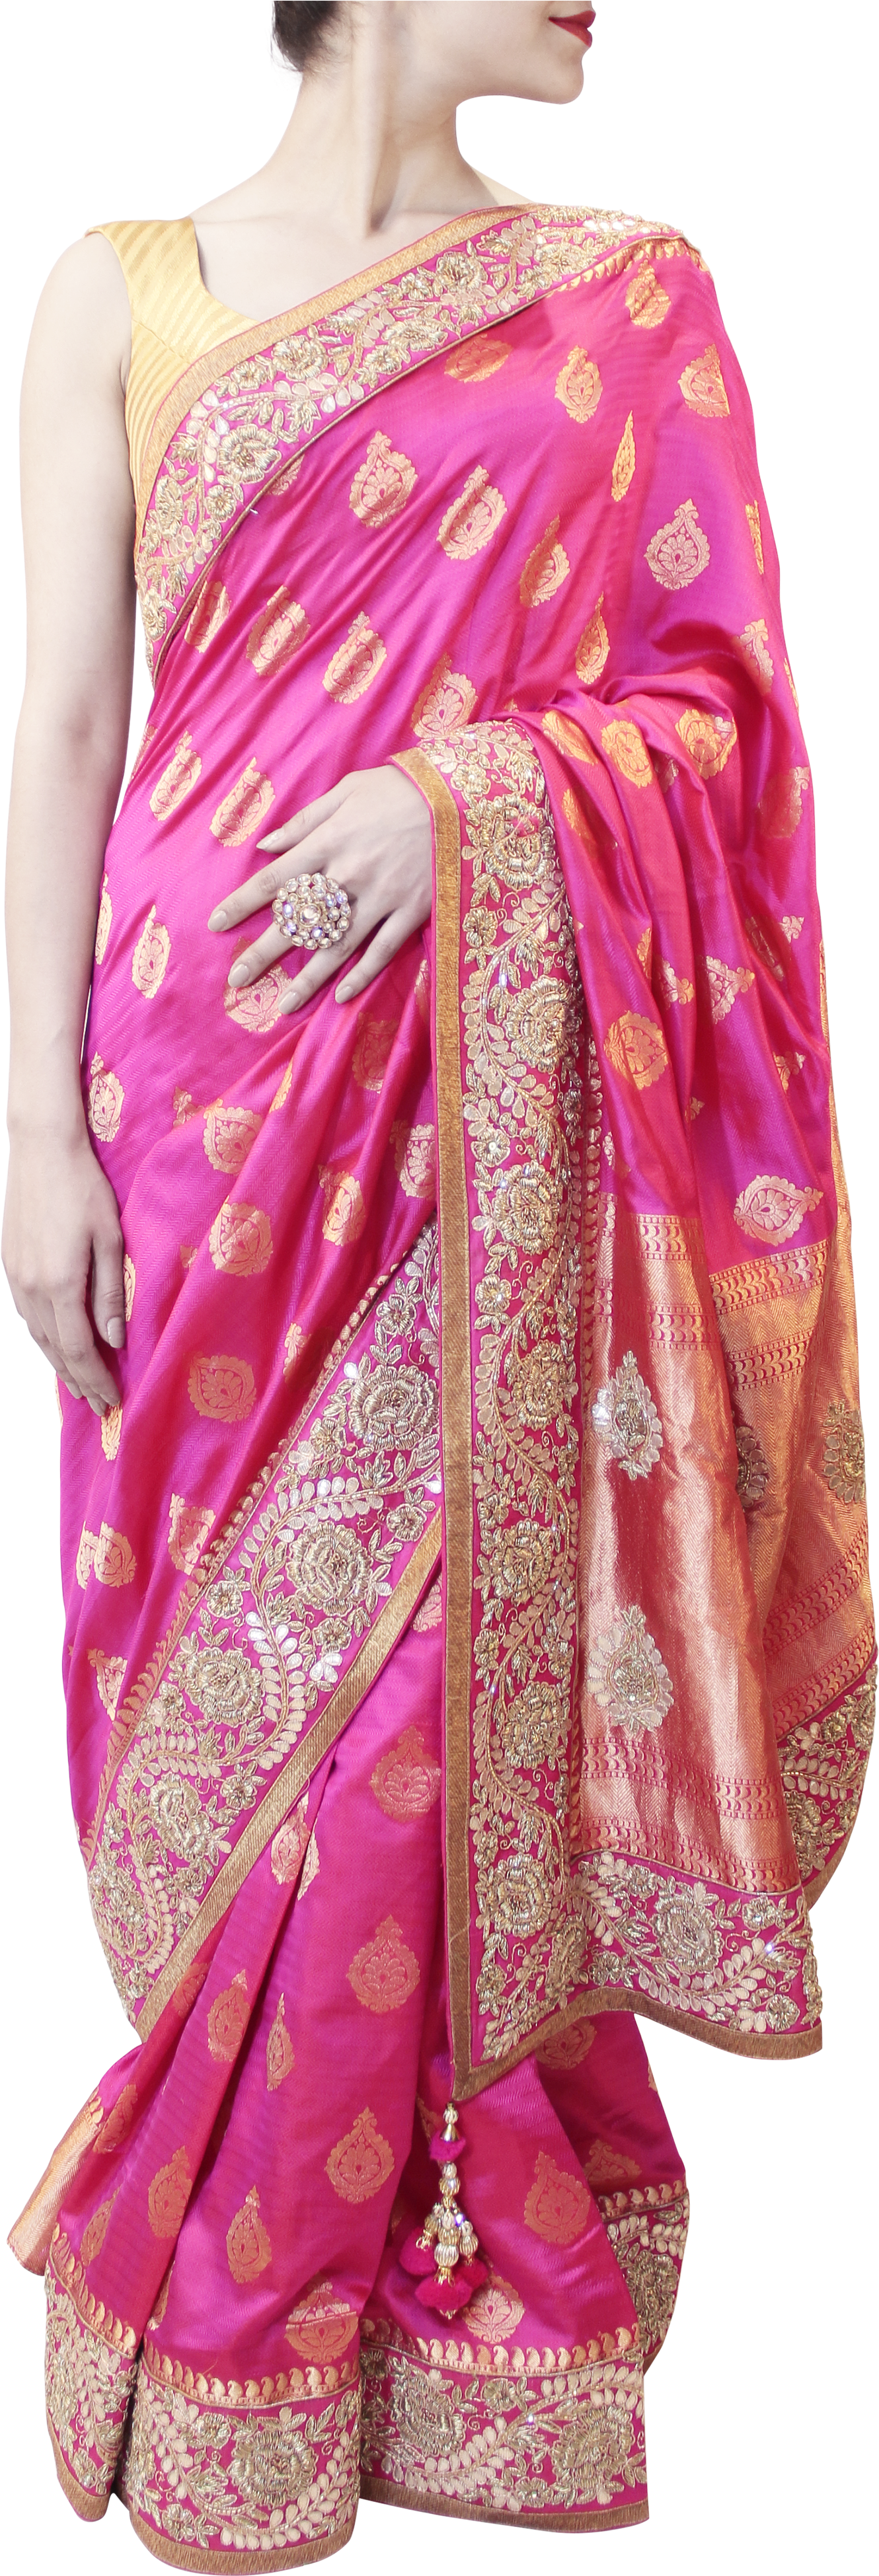 Elegant Pink Sareewith Gold Embroidery PNG image